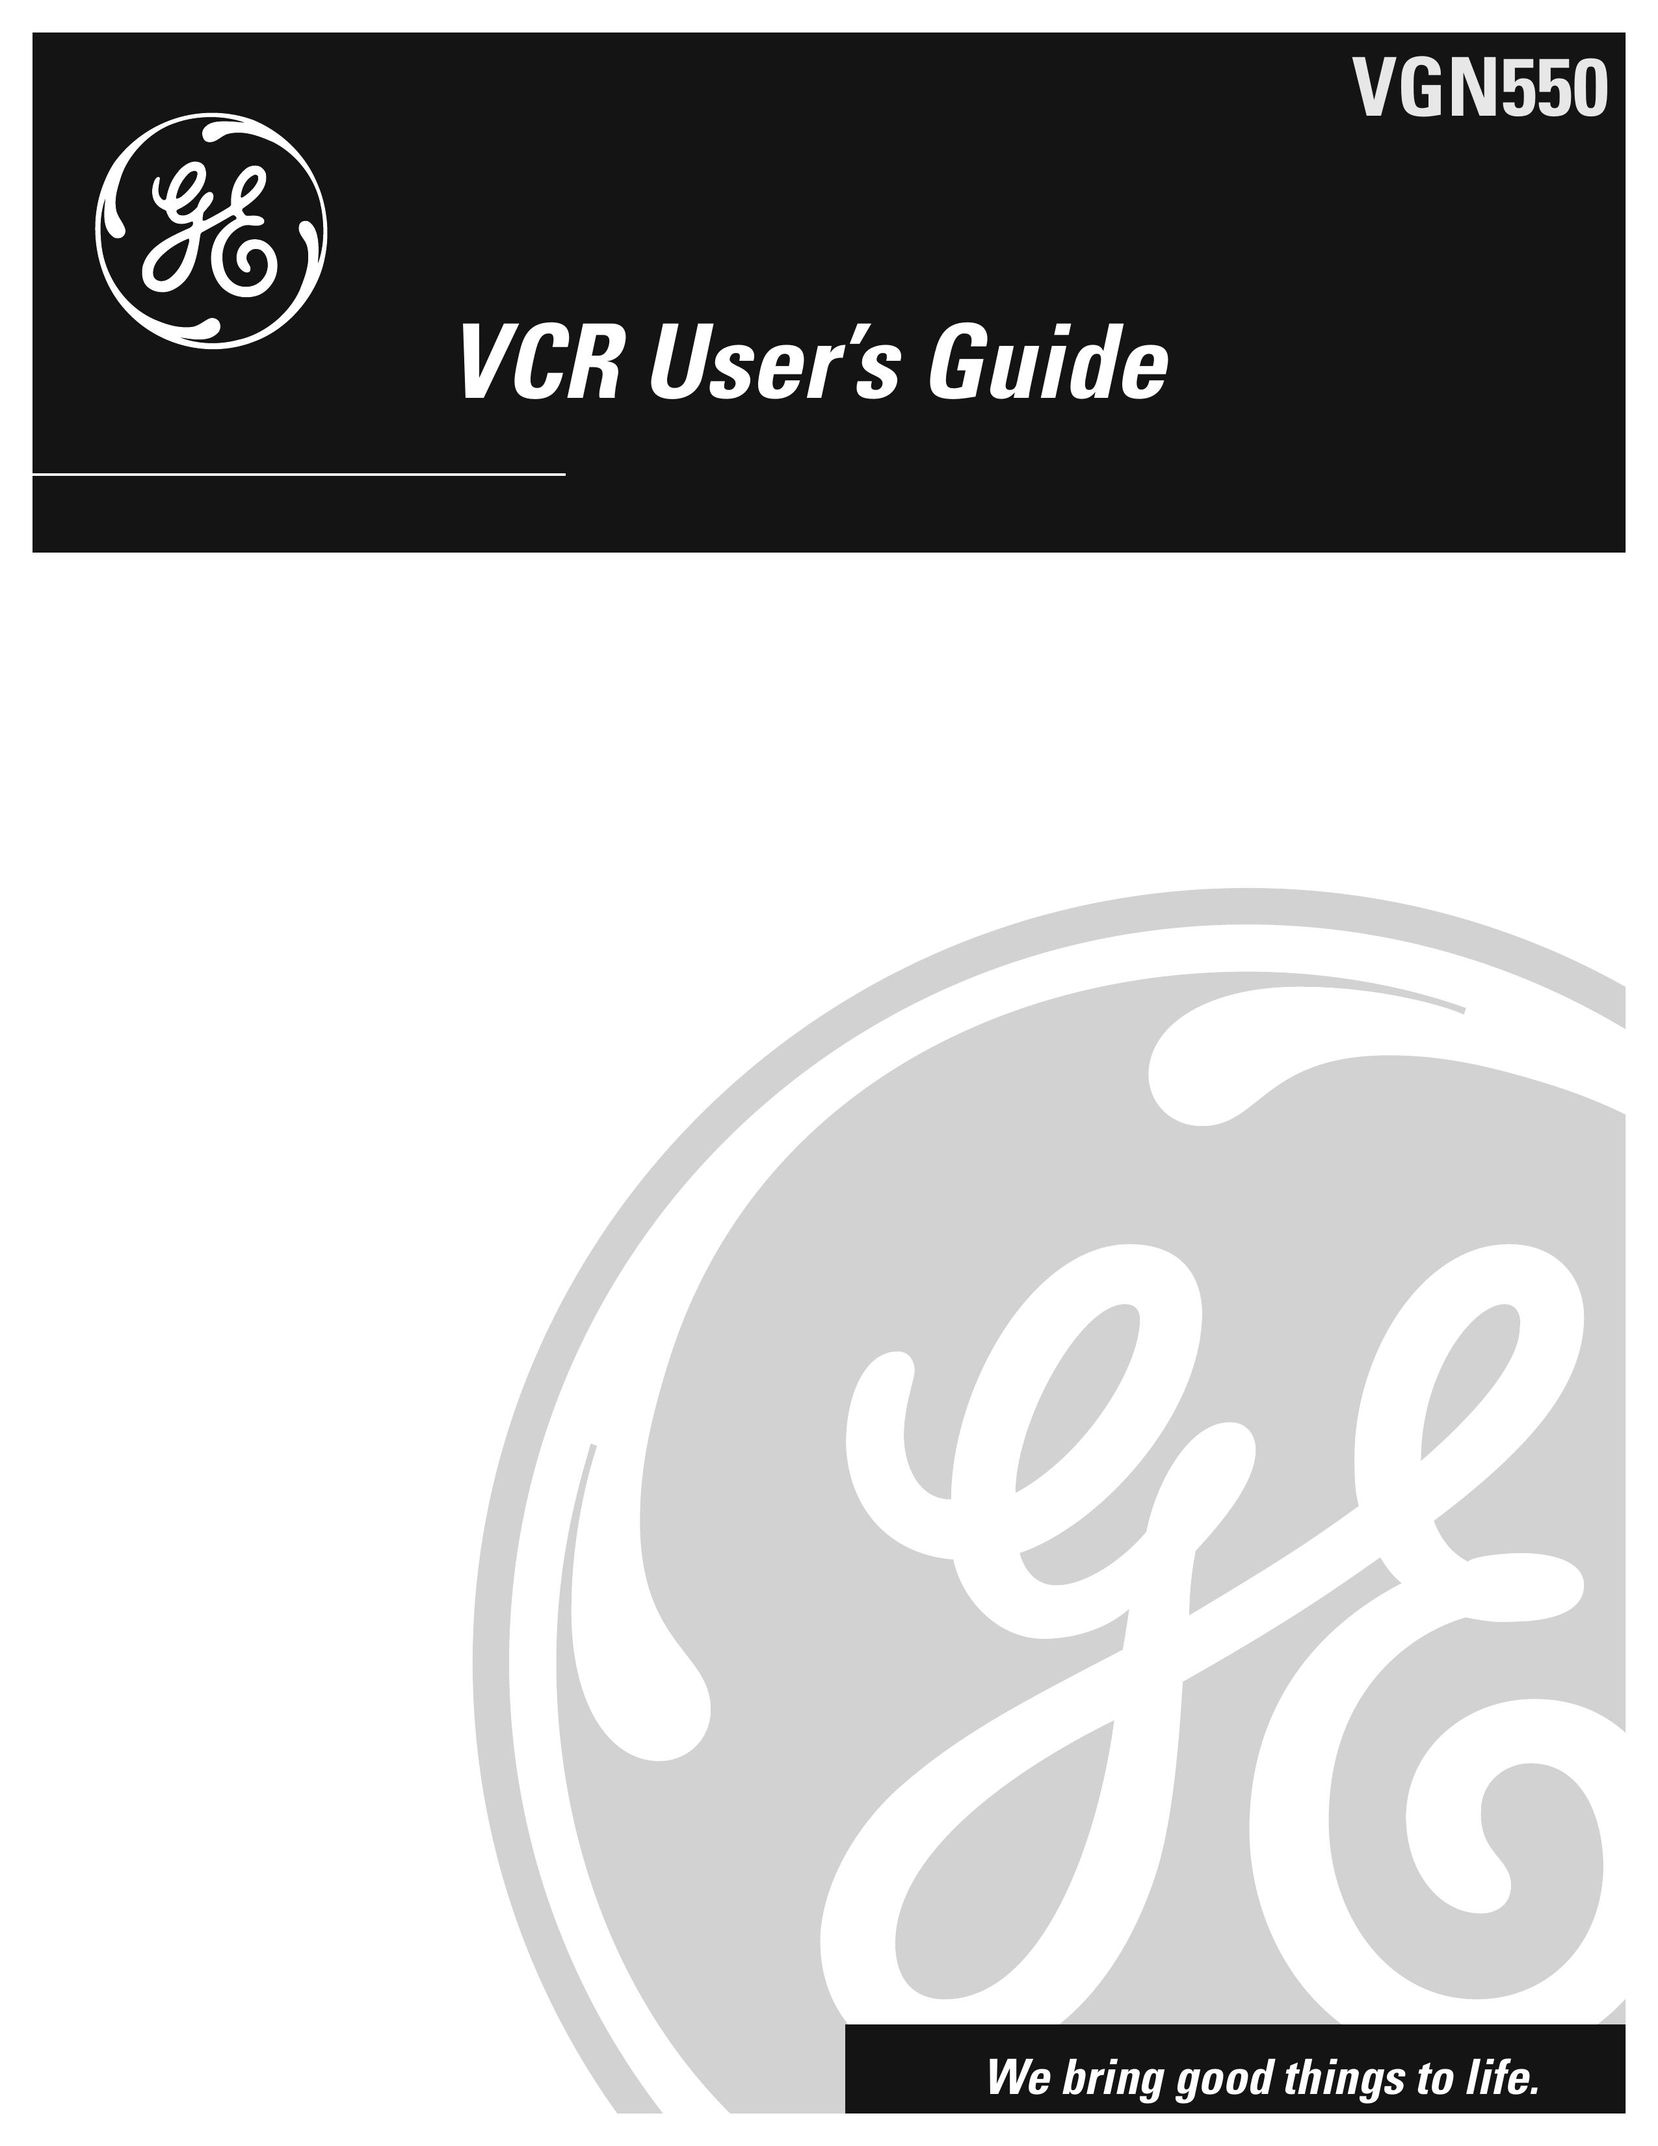 GE VGN550 VCR User Manual